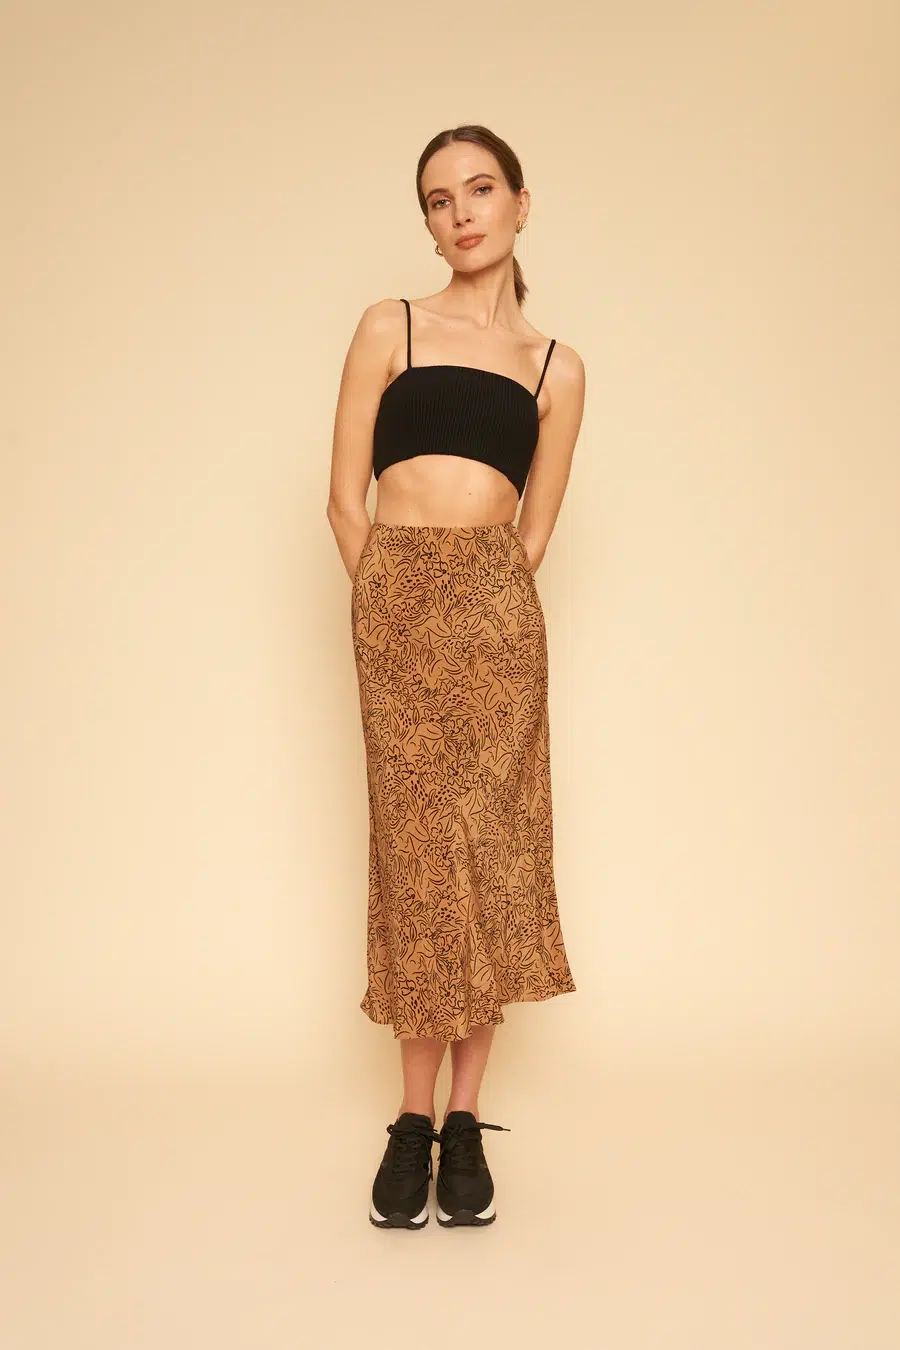 A woman in a black crop top and patterned skirt paired with black sneakers standing against a beige background.